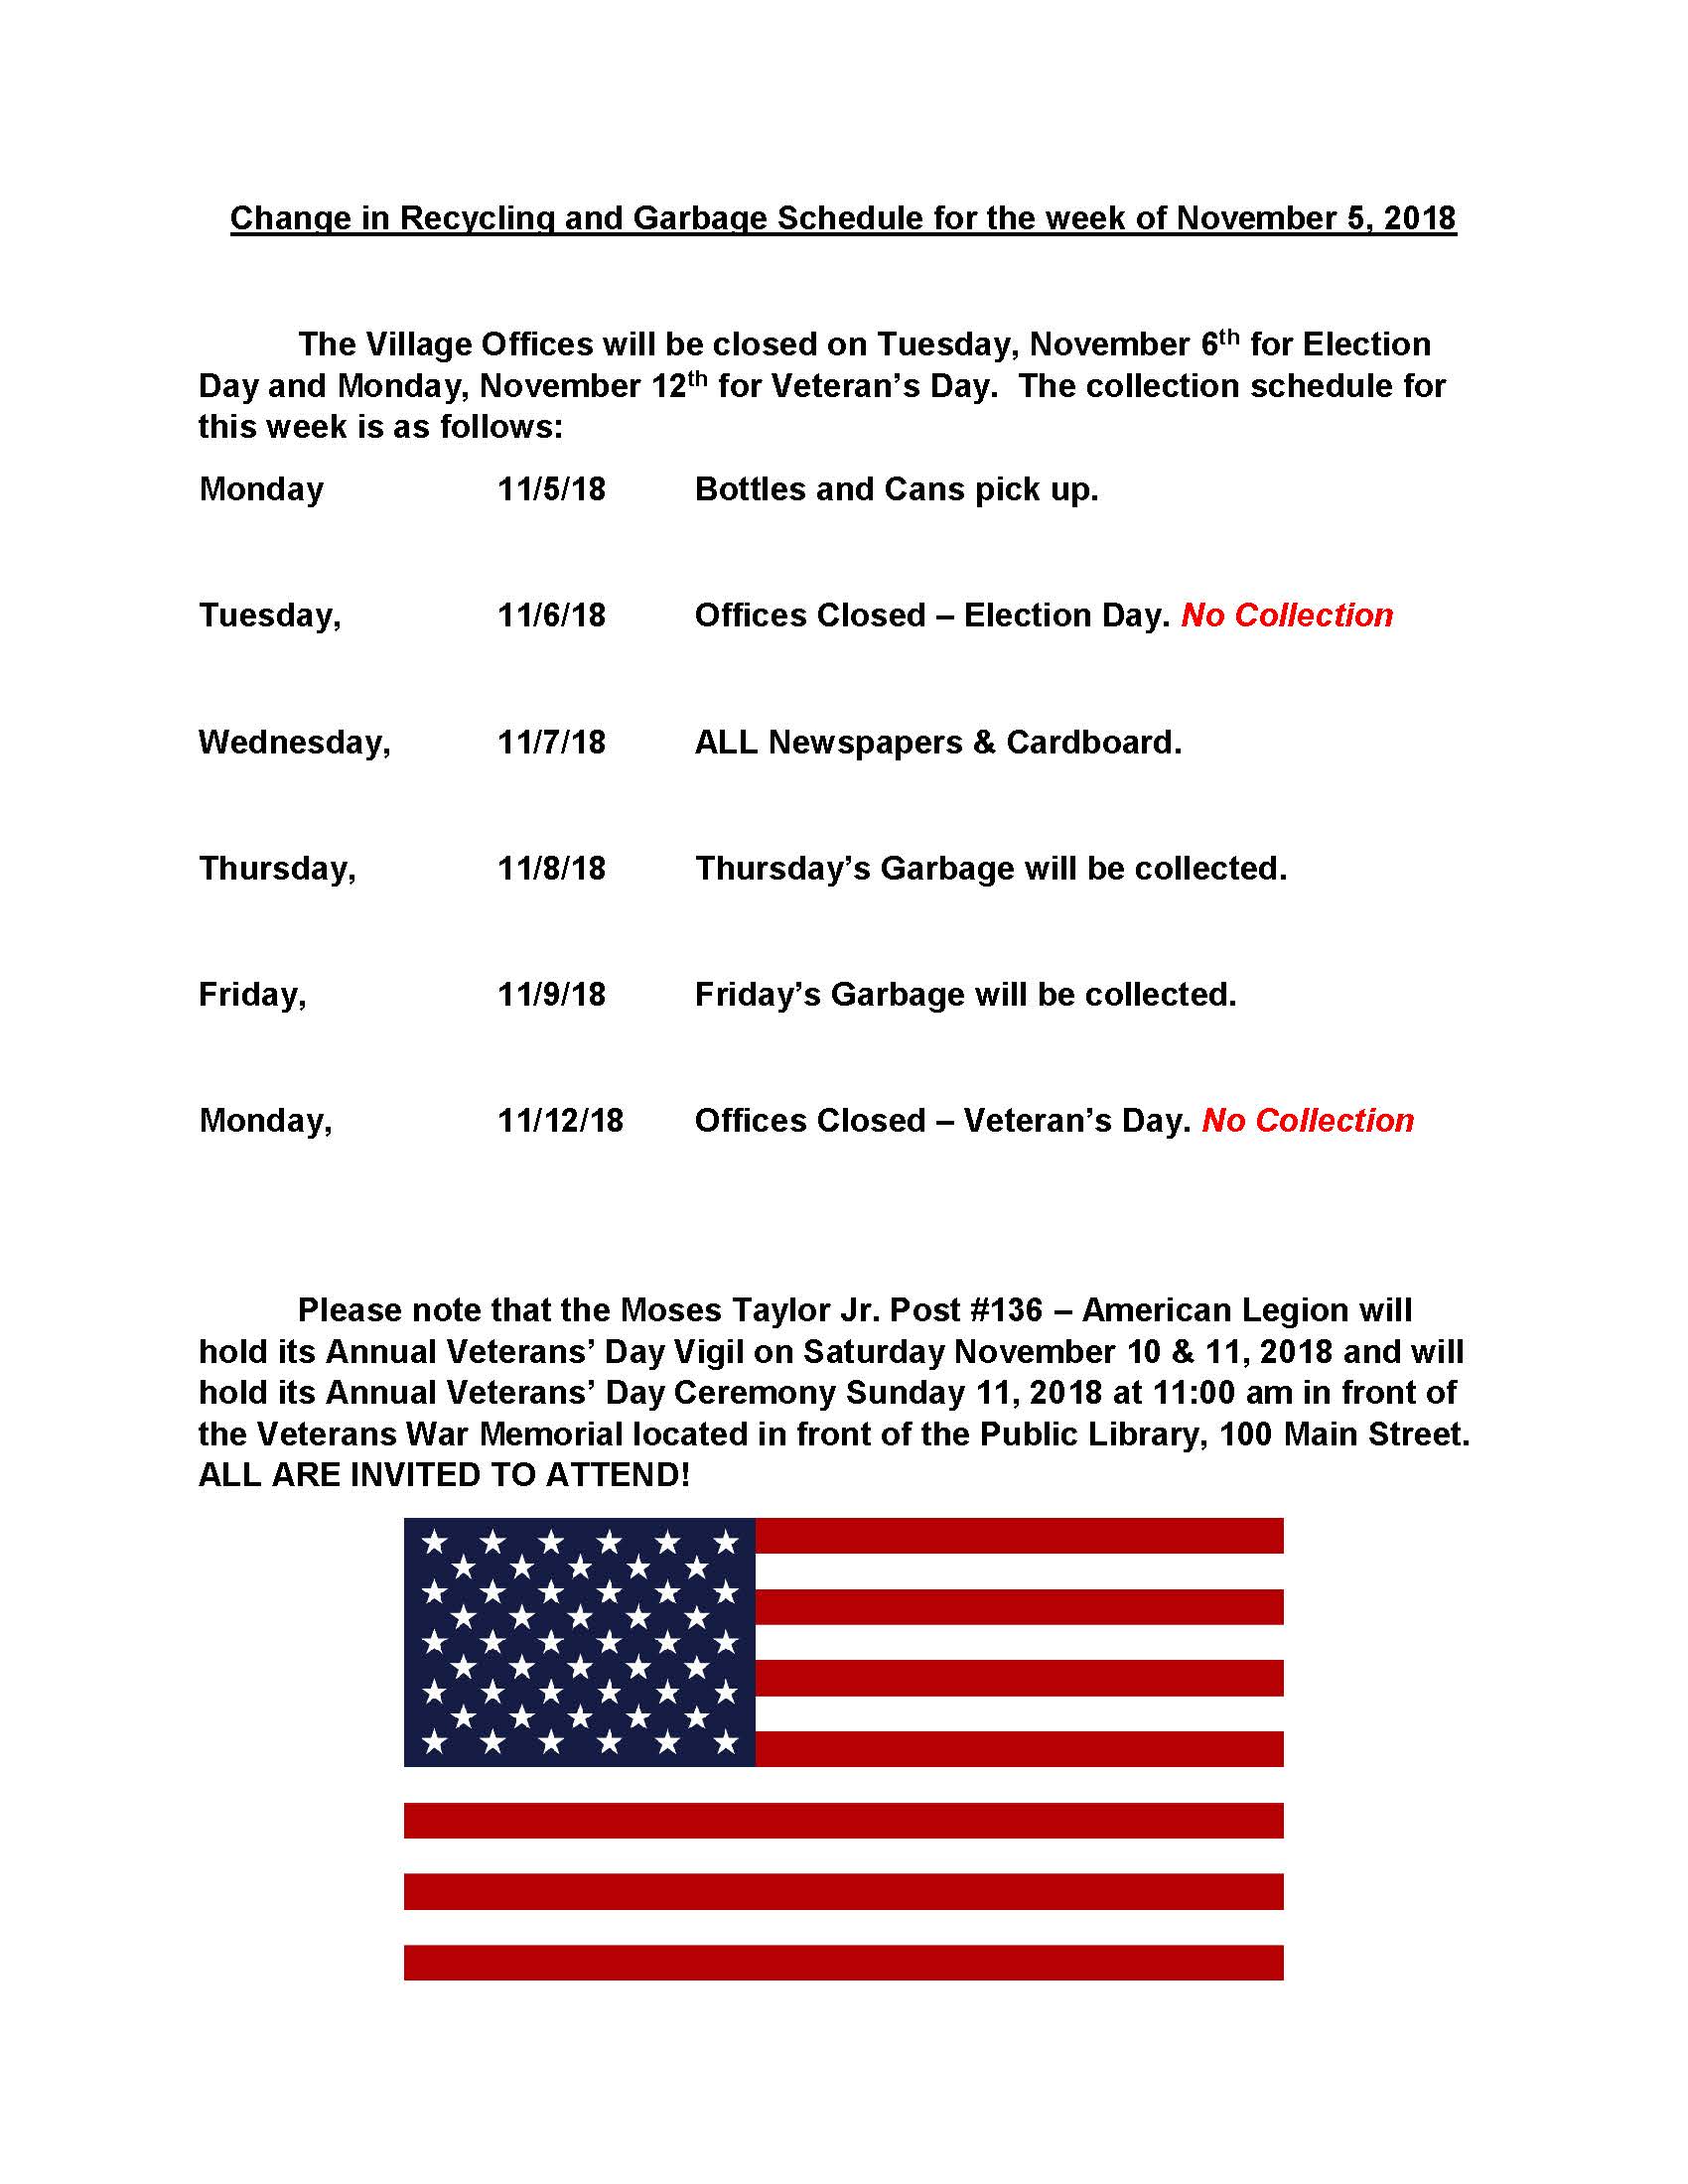 Change in Recycling Schedule for the week of November 6